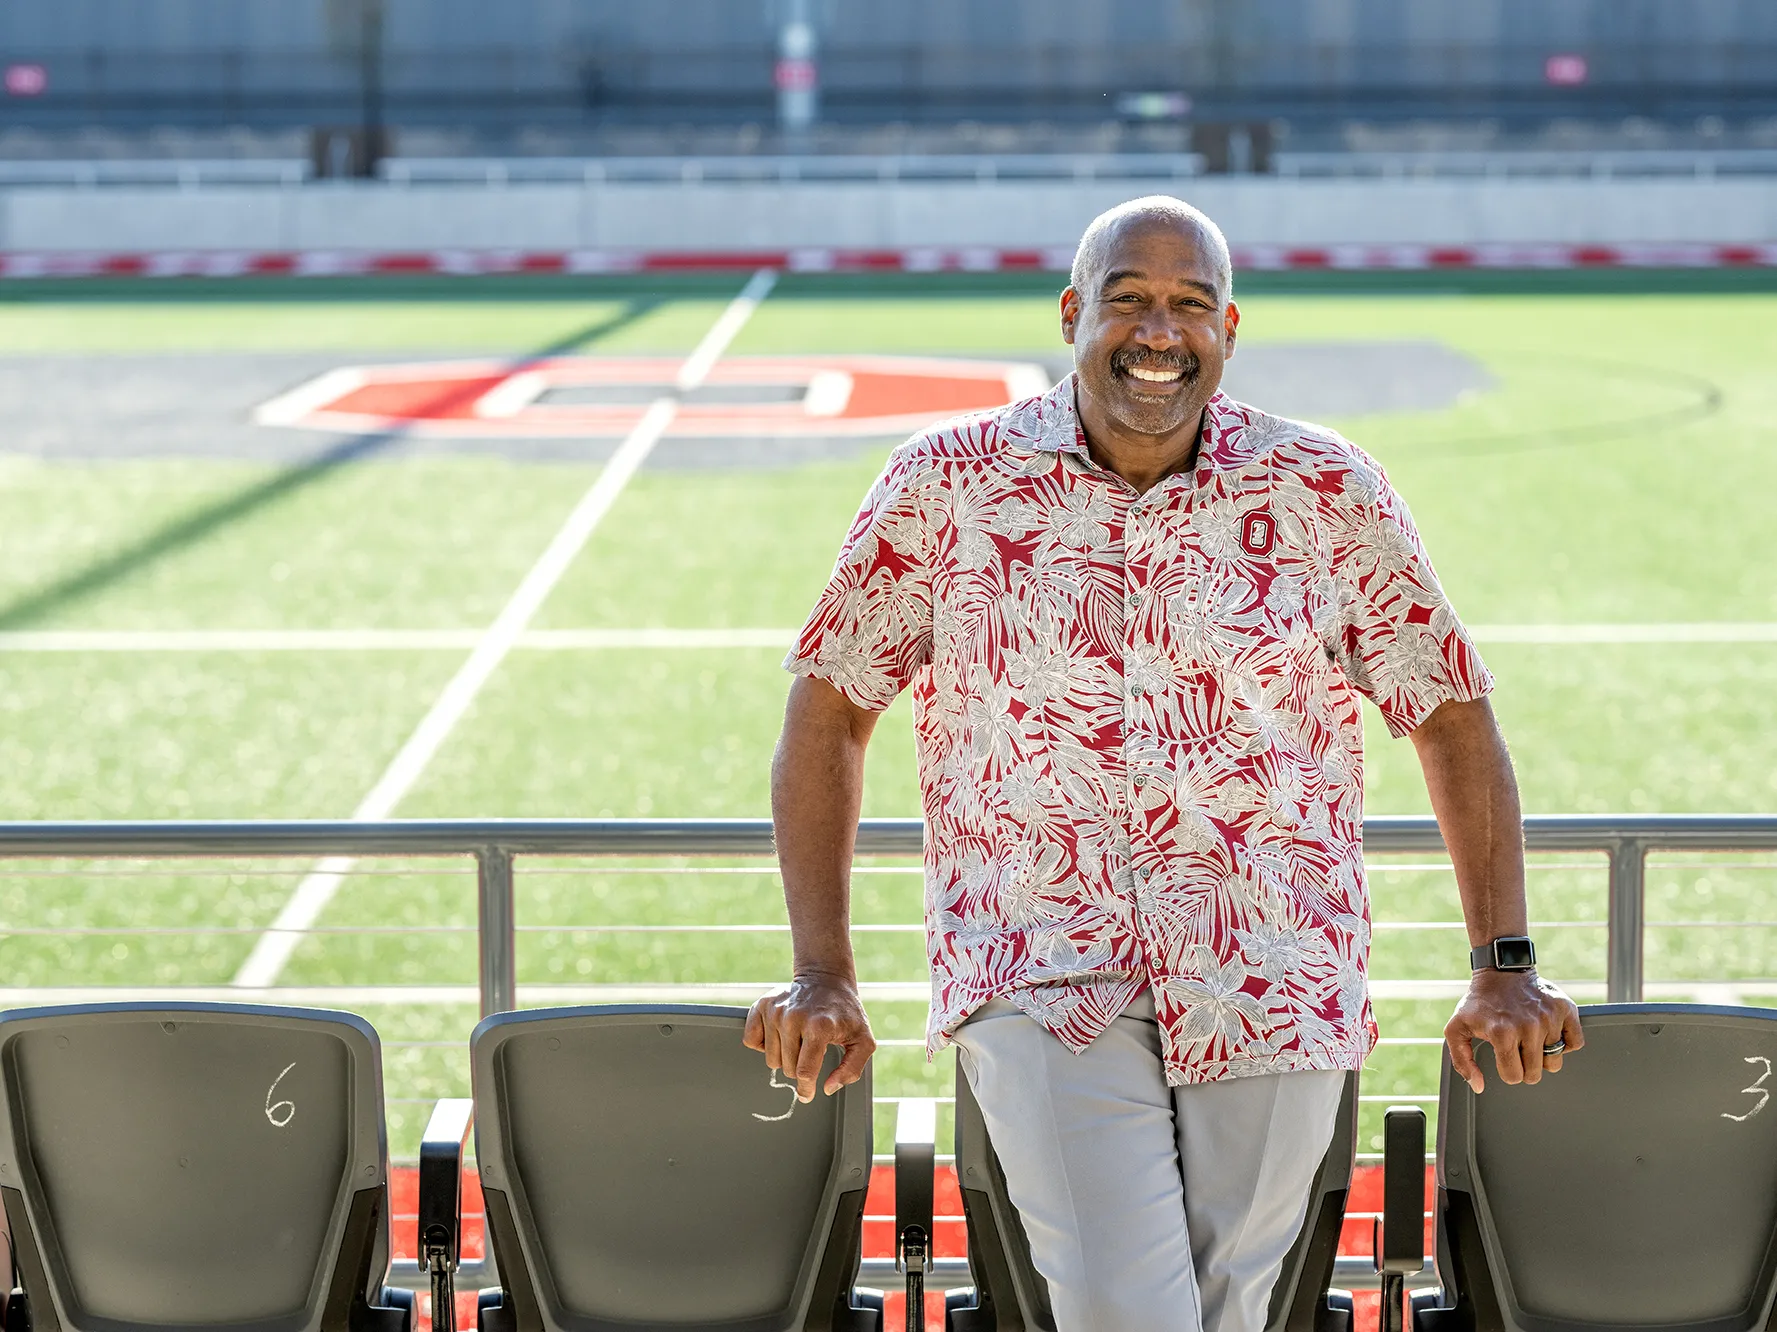 Wearing an Ohio State-colored tropical shirt—that looks perfect for retirement or vacation—Gene Smith grins as he leans on some front-row seats at Ohio Stadium. 